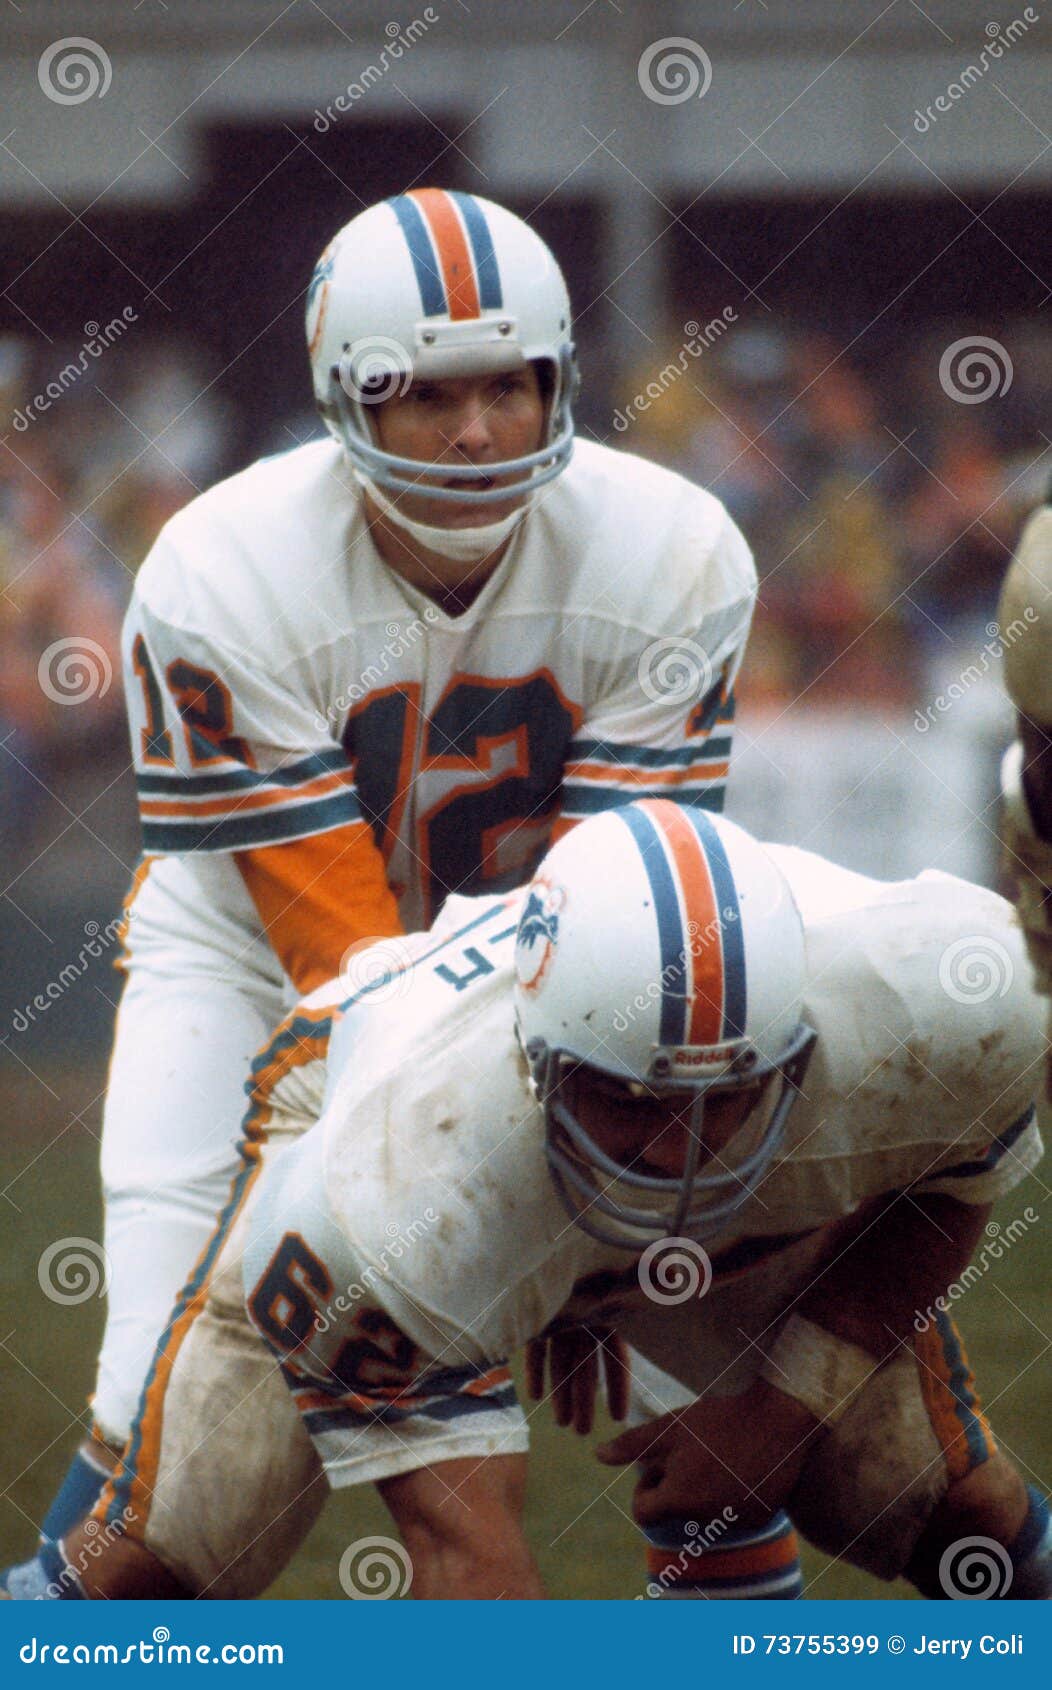 griese miami dolphins